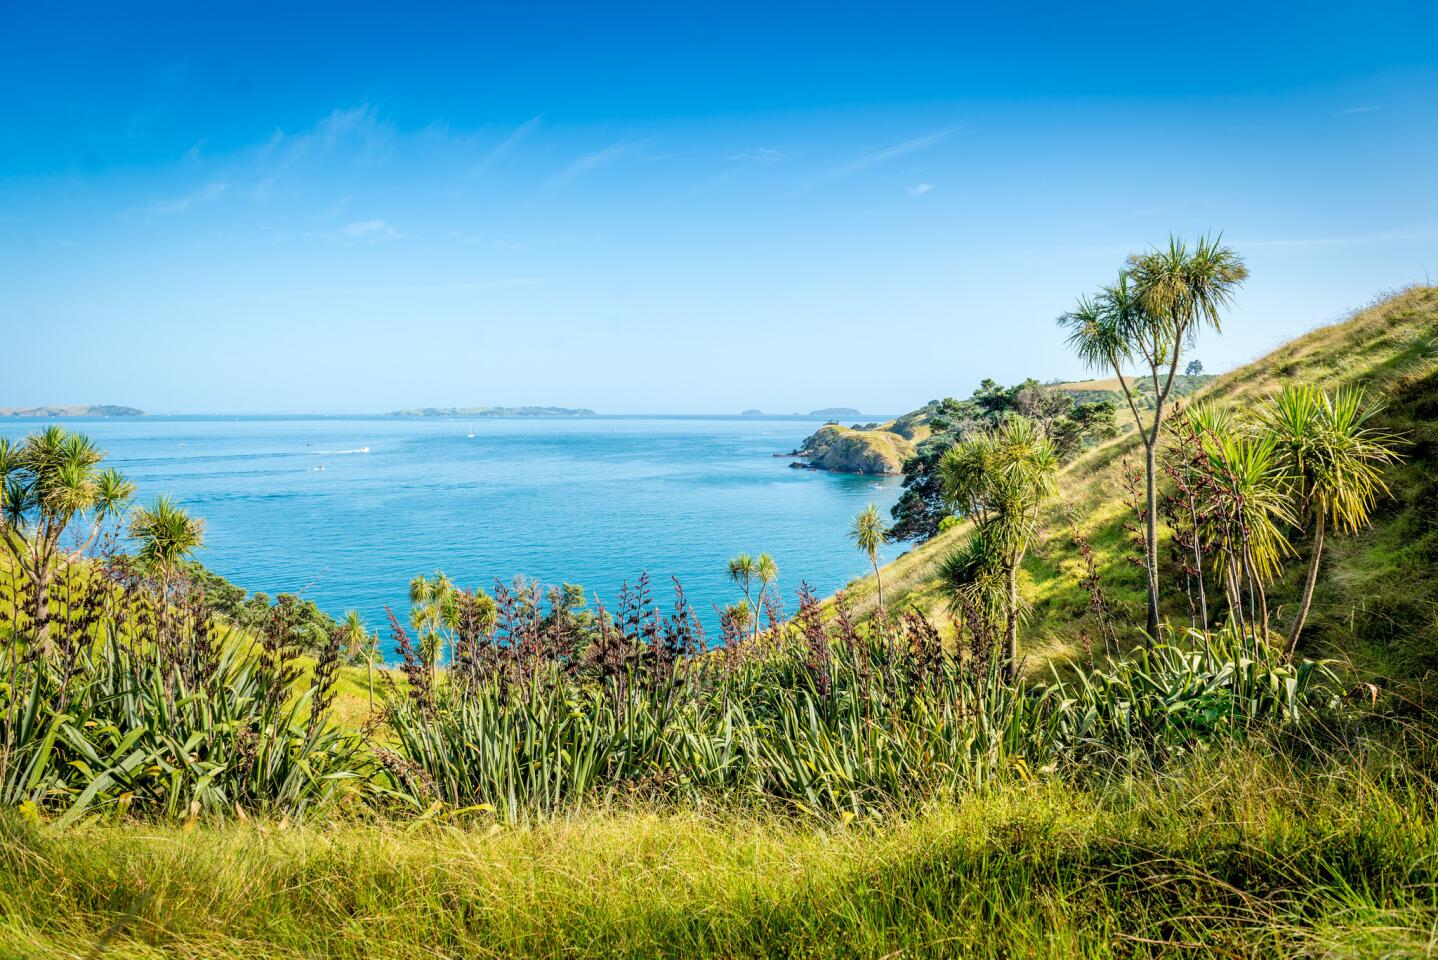 Hiking, restaurants, wineries and galleries make this location — a 45 minute ferry fride from Auckland — ideal for tourists. A walking track around the island takes an estimated five days and you can experience the atmosphere at your own pace.